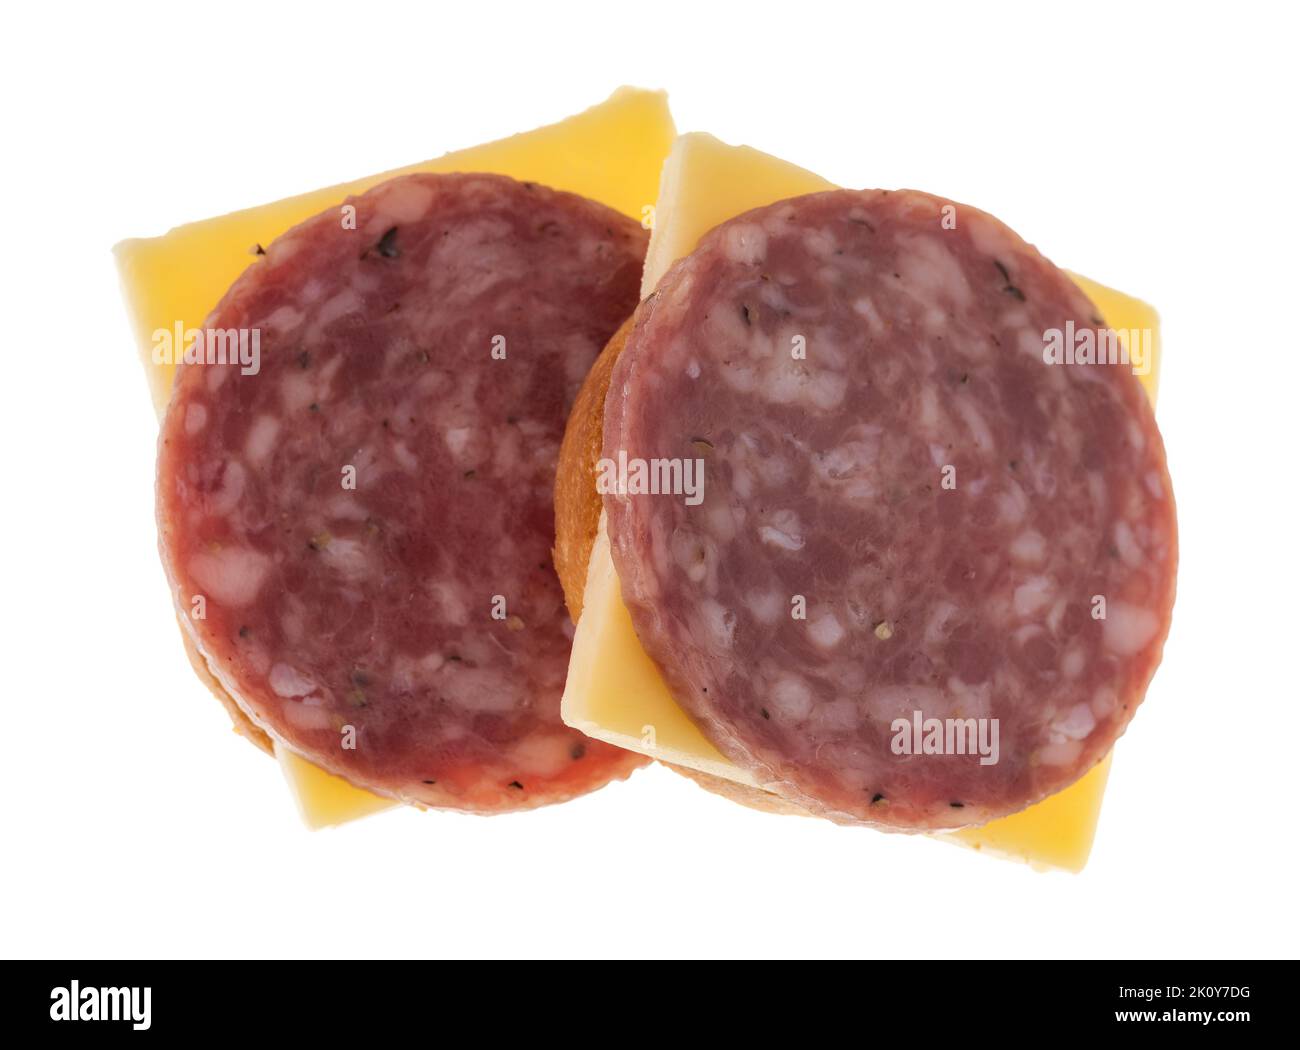 Two snack crackers with dry salami and gouda cheese on a white background. Stock Photo